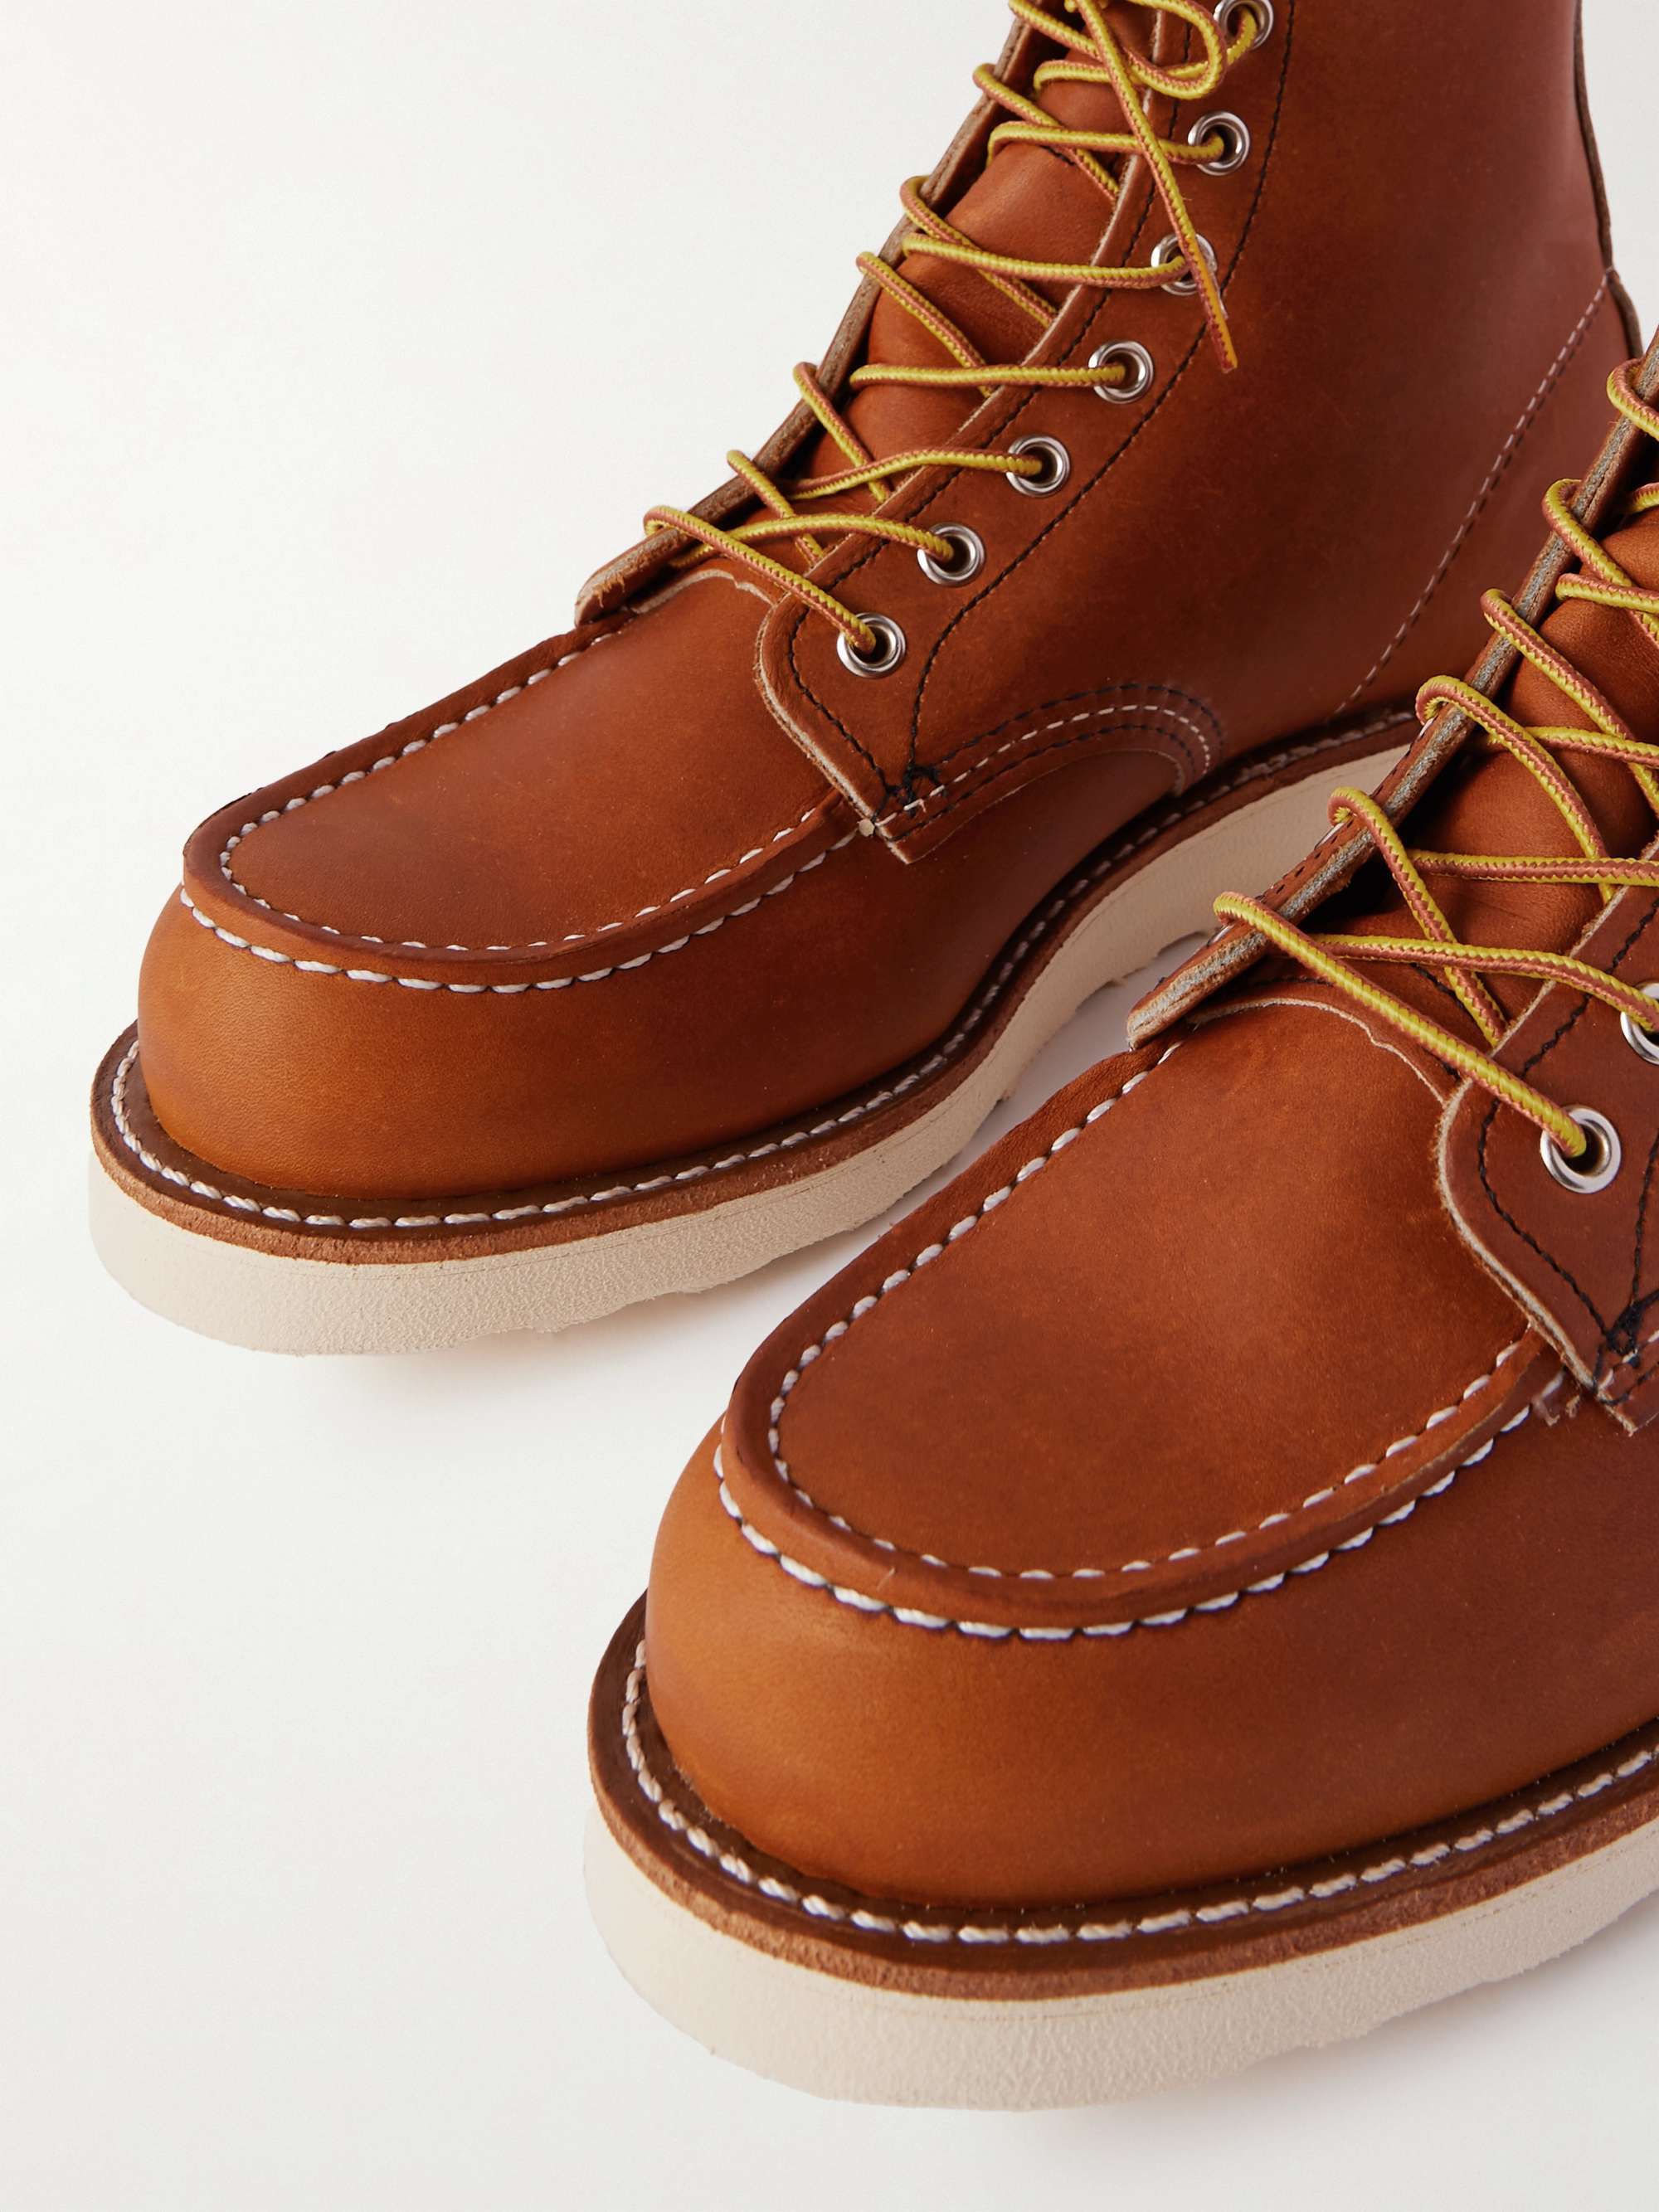 RED WING SHOES 875 Classic Moc レザー ブーツ | ミスターポーター